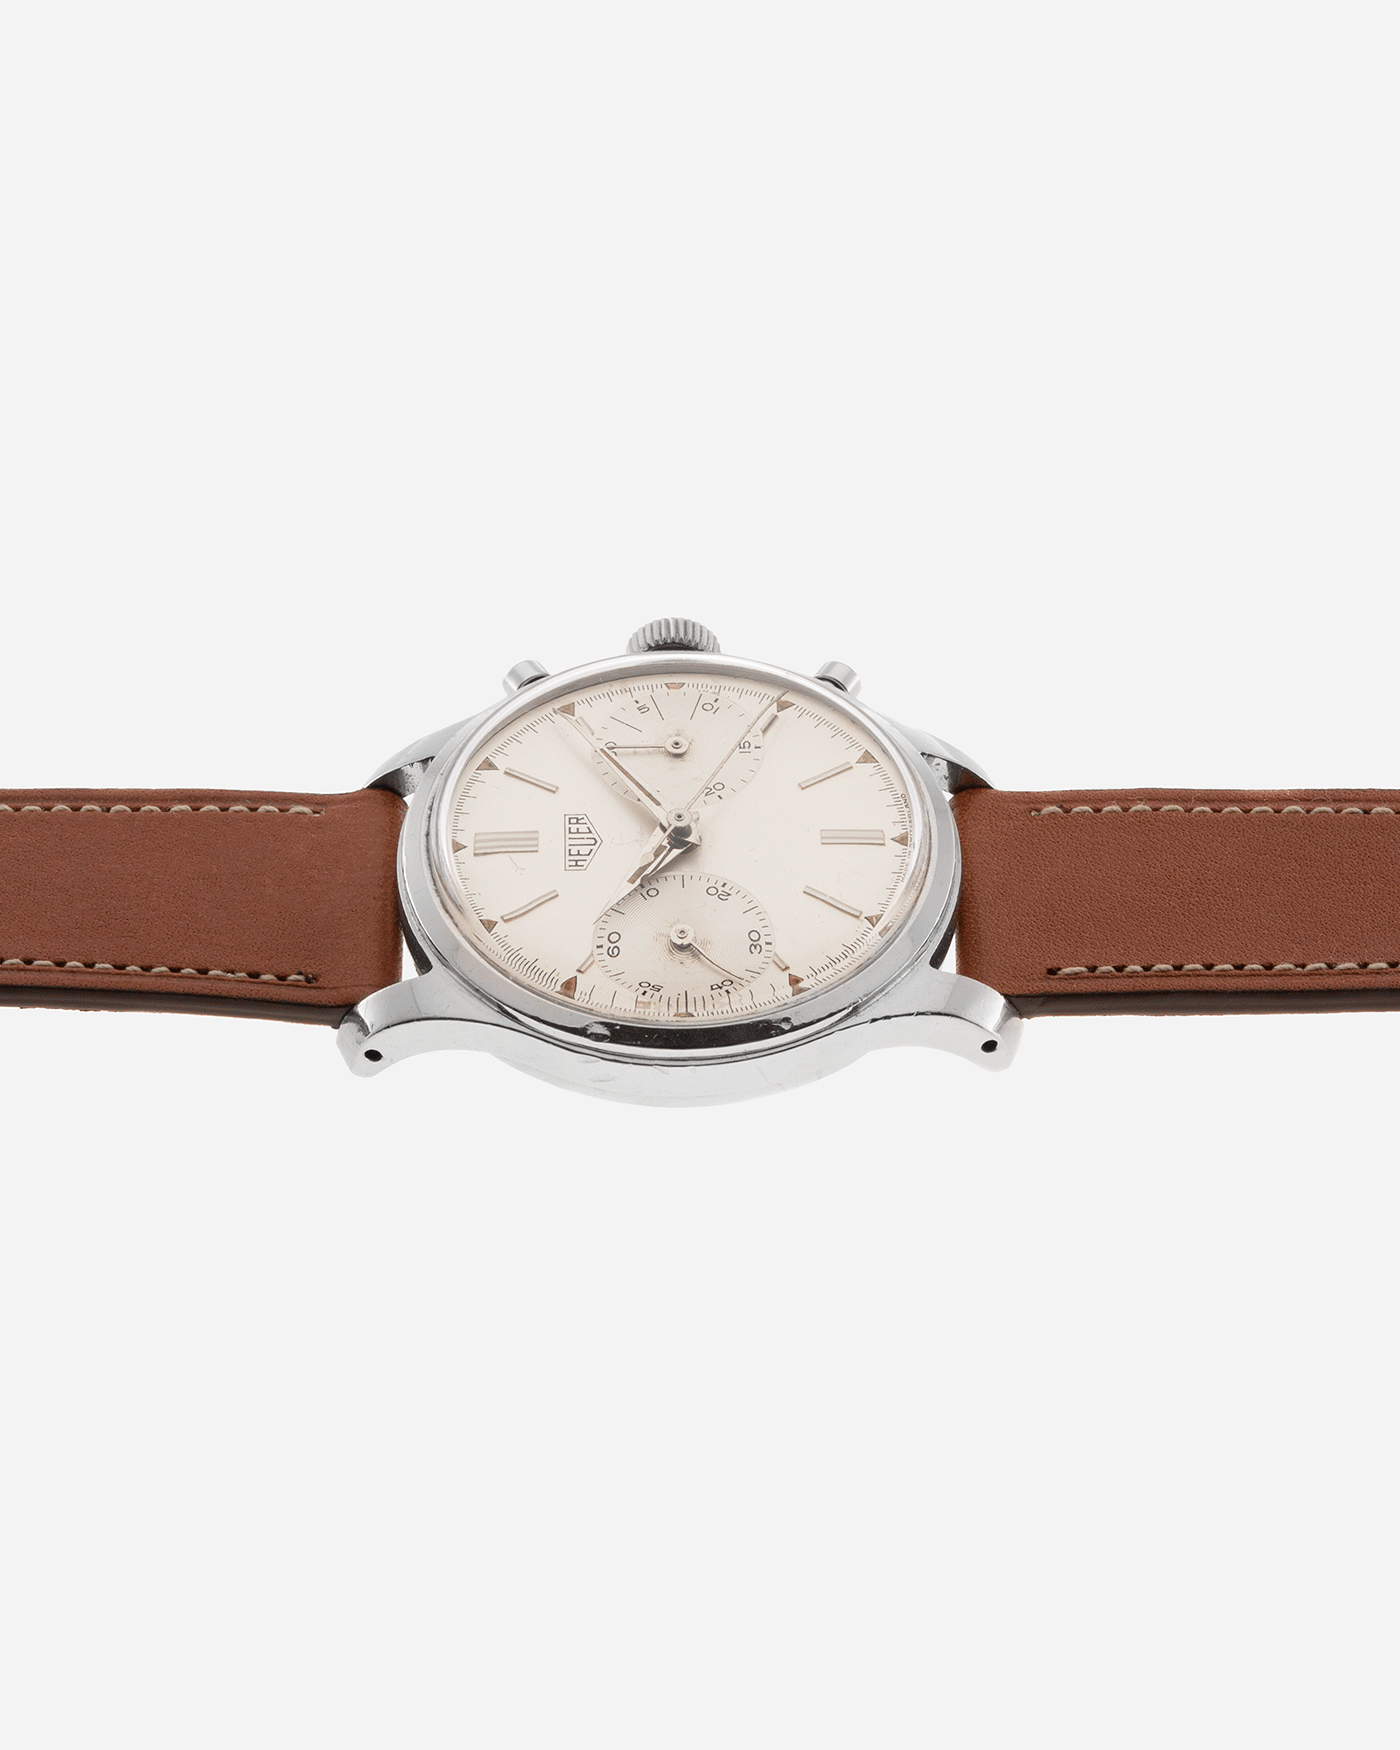 Brand: Heuer Year: 1950’s Reference Number: 404 Material: Stainless Steel Movement: Valjoux 23 Case Diameter: 34mm Lug Width: 18mm Bracelet/Strap: Nostime Gold Tan Barenia Smooth Calf